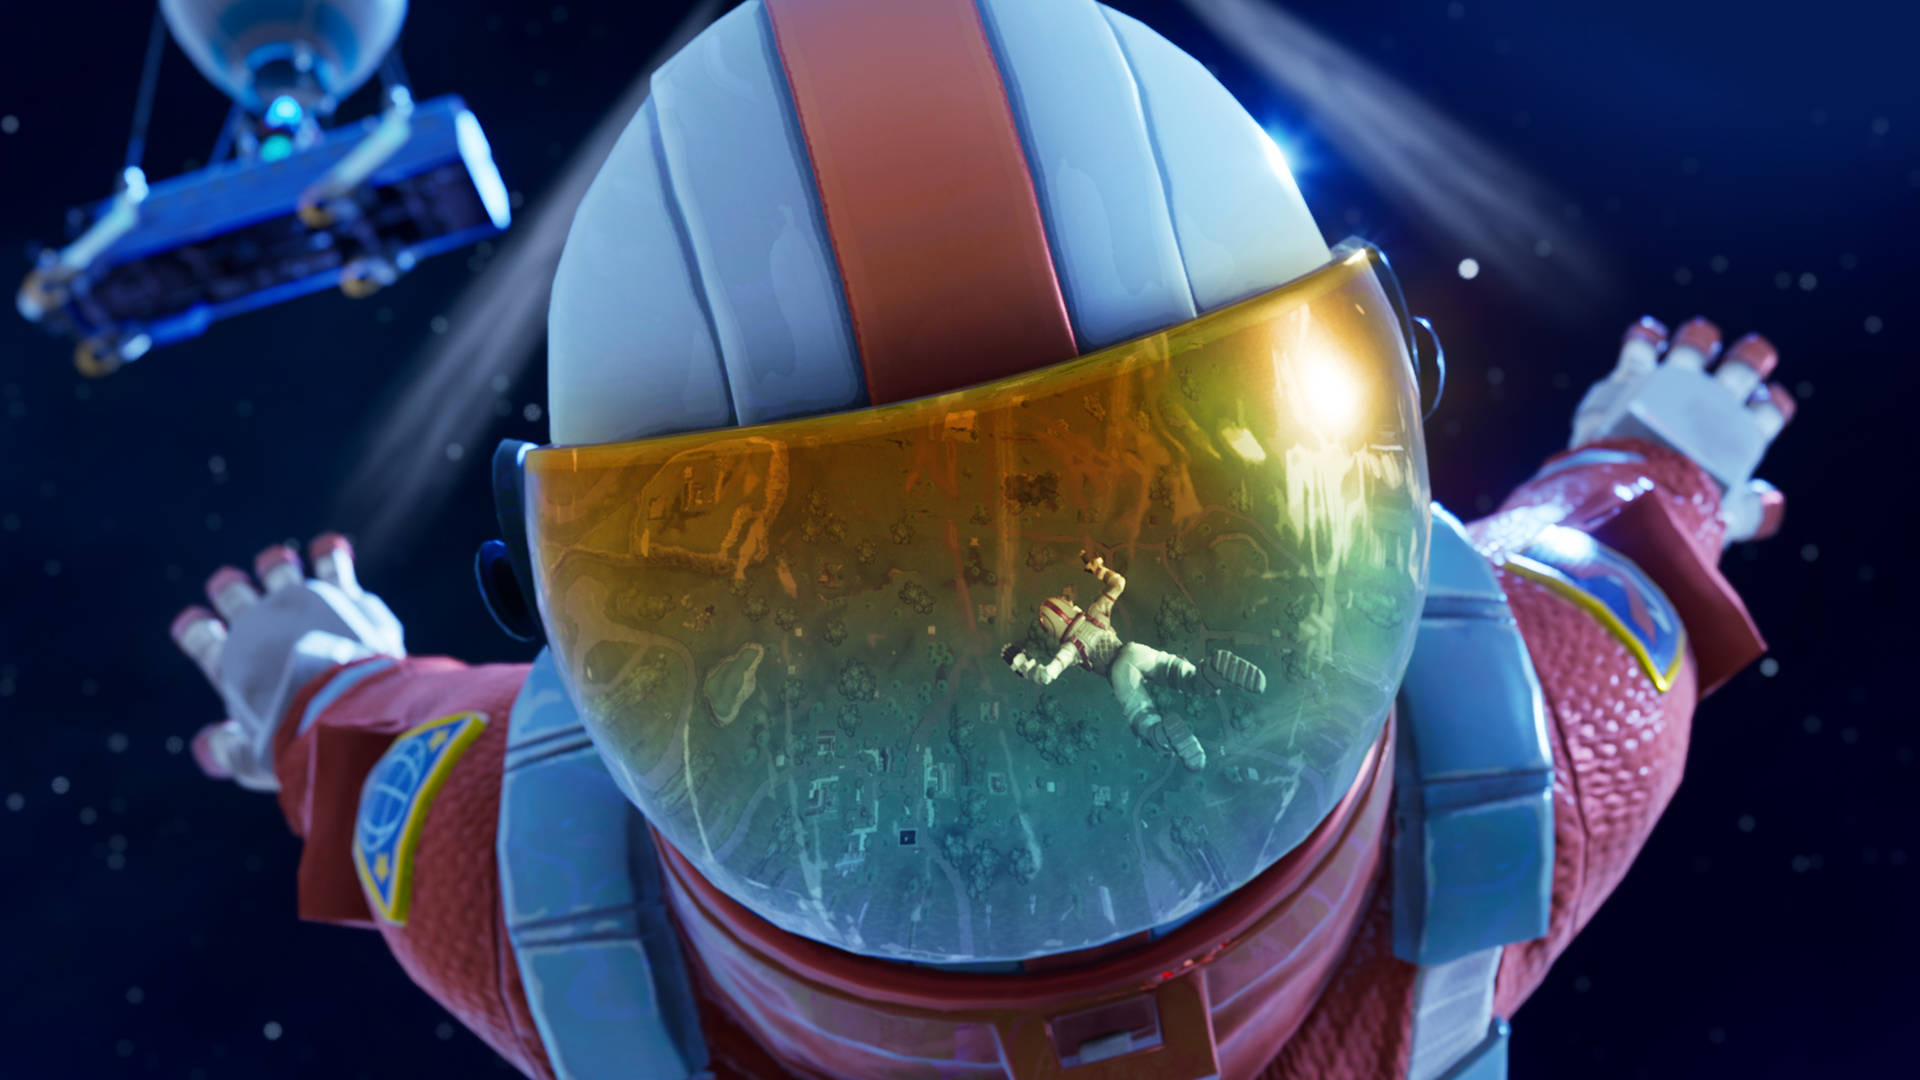 Fortnite 1920X1080 Wallpaper and Background Image